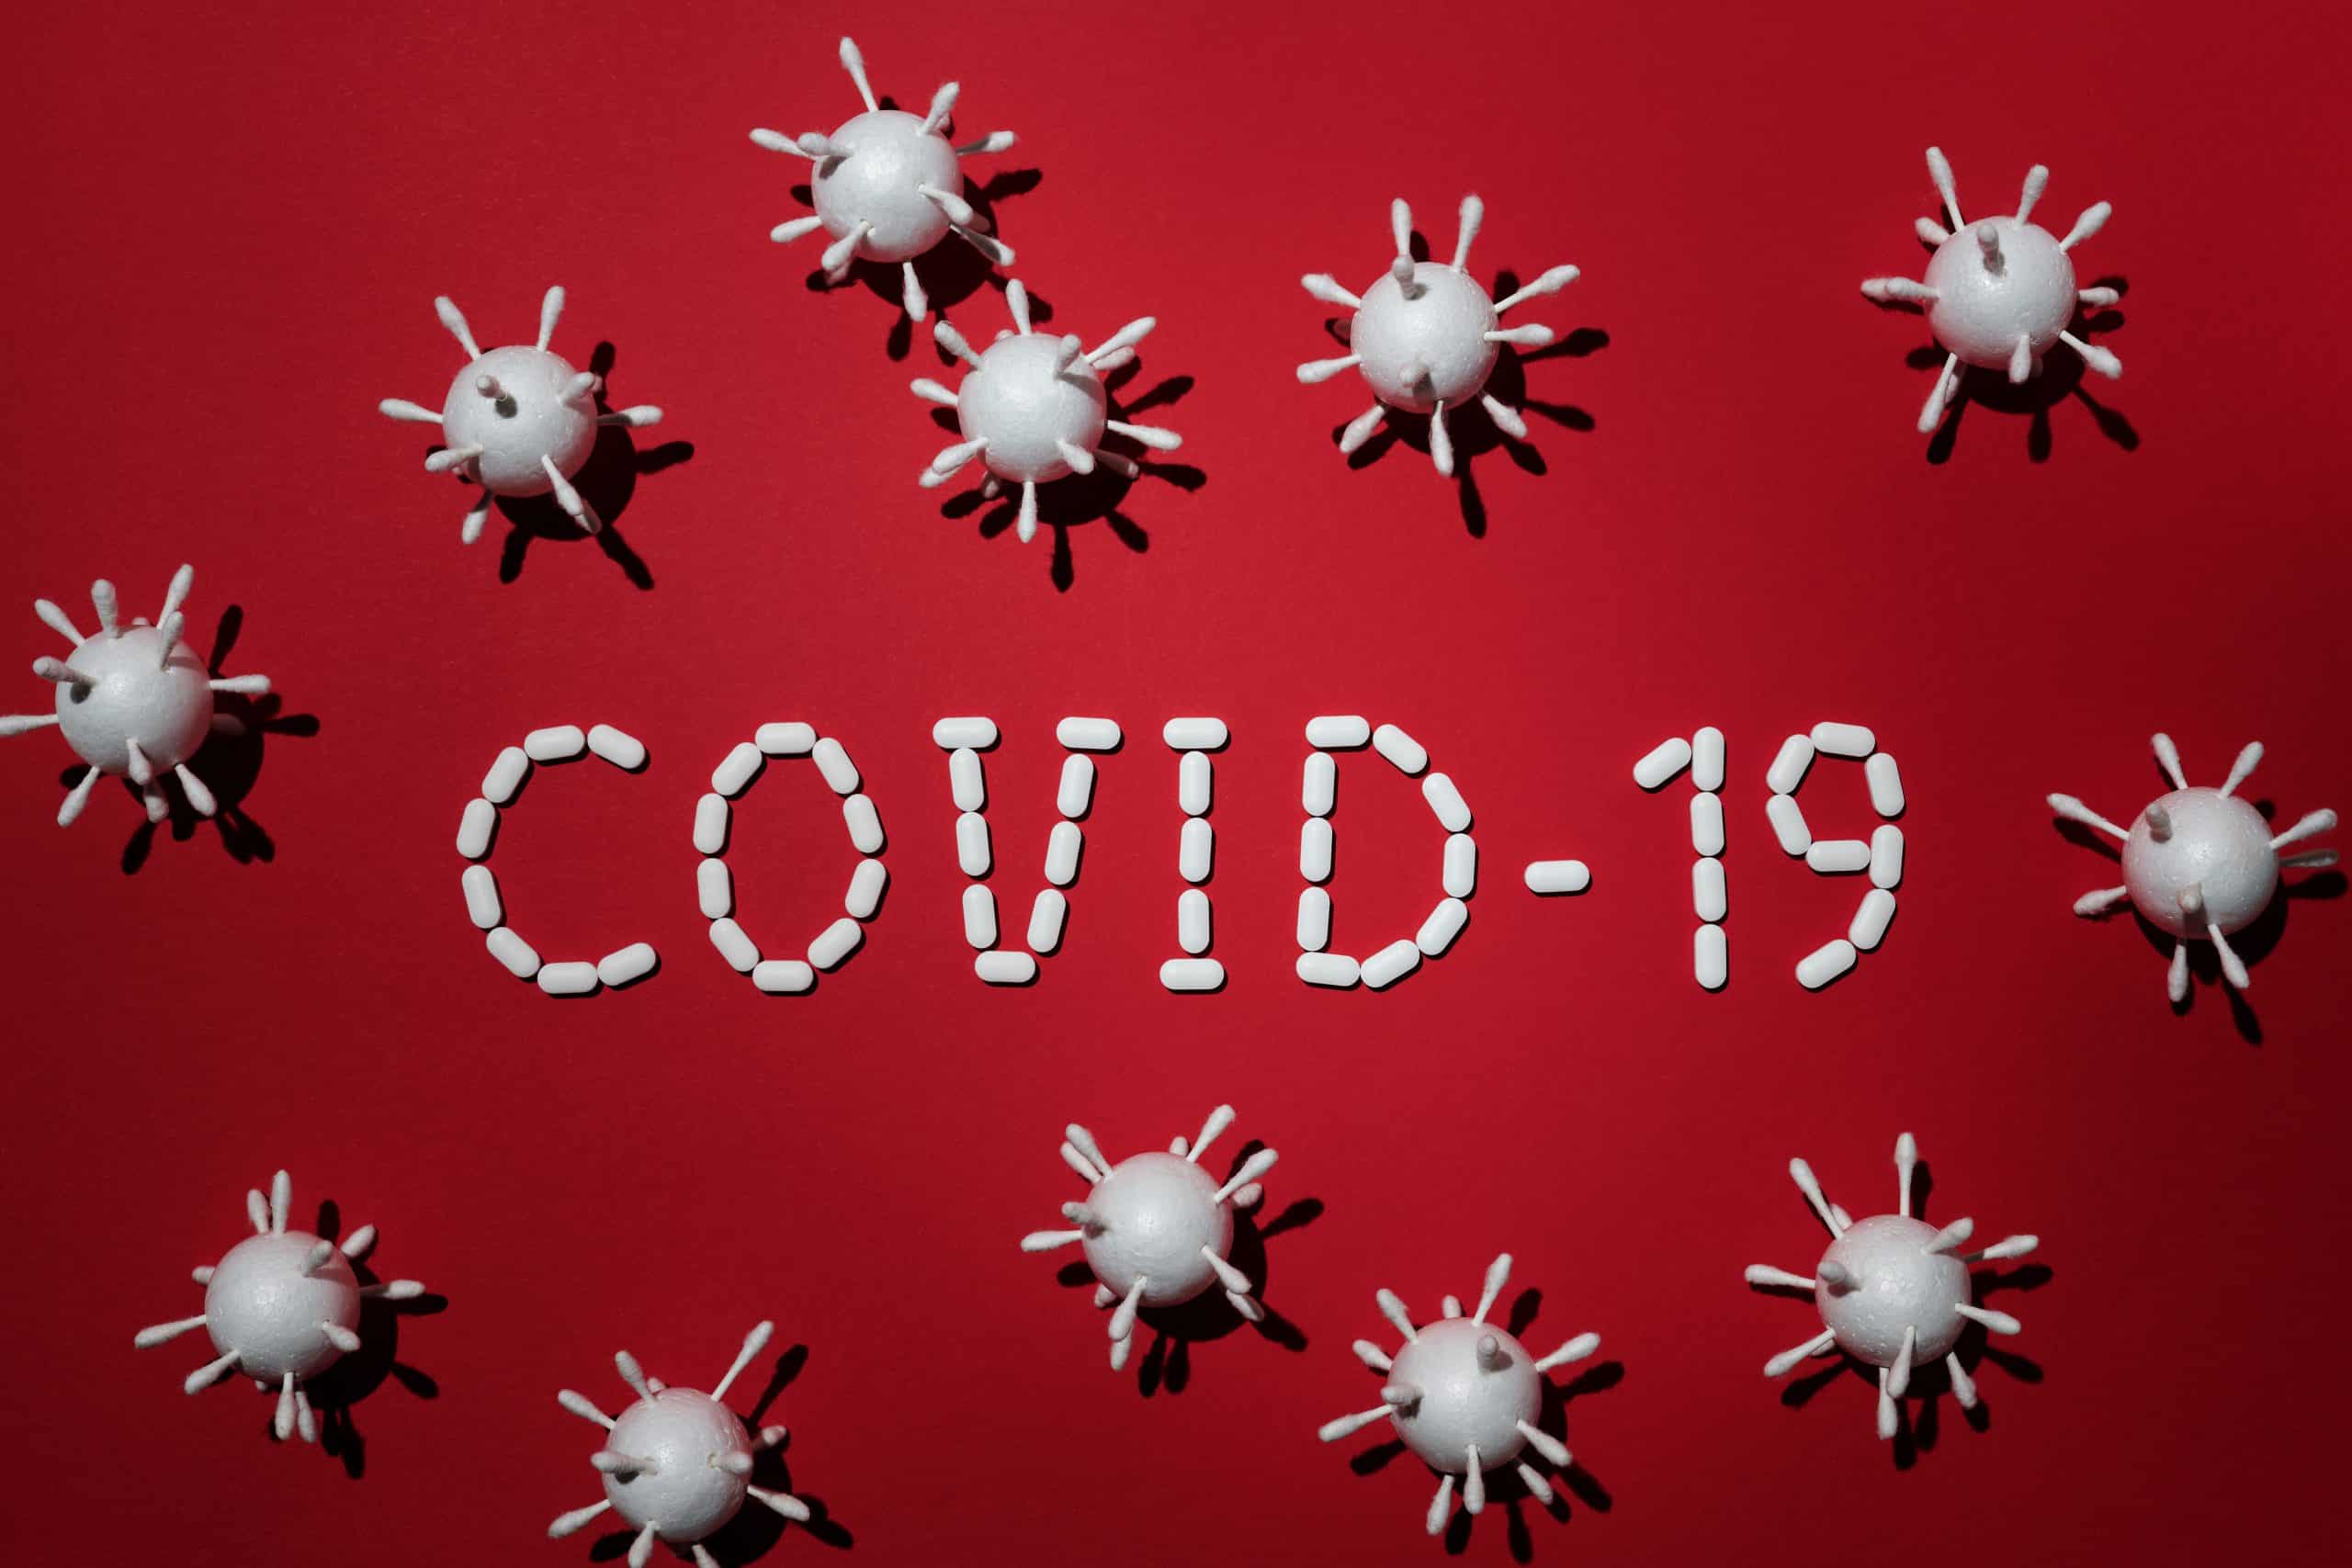 COVID-19 and Collateral Damage: Killing vs. Letting Die